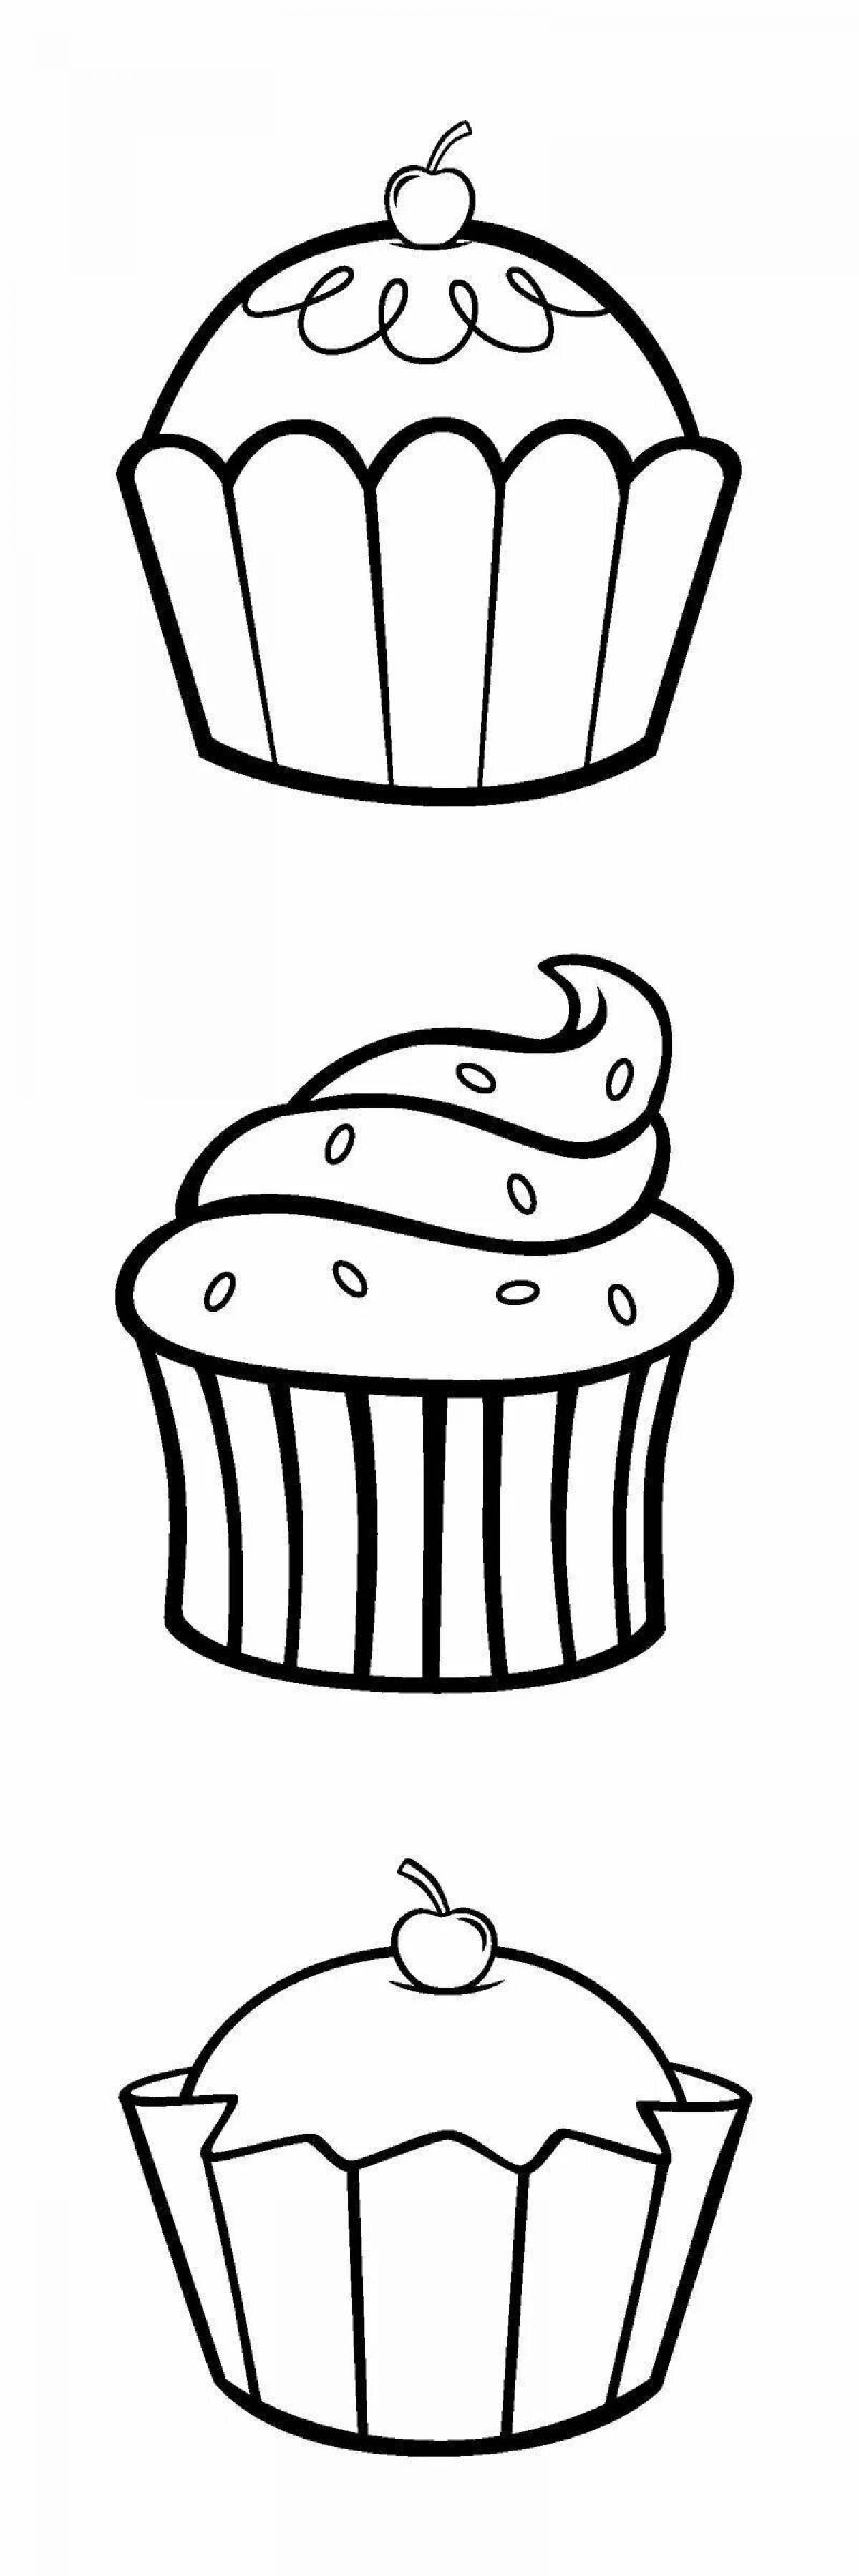 Glitter cake coloring page